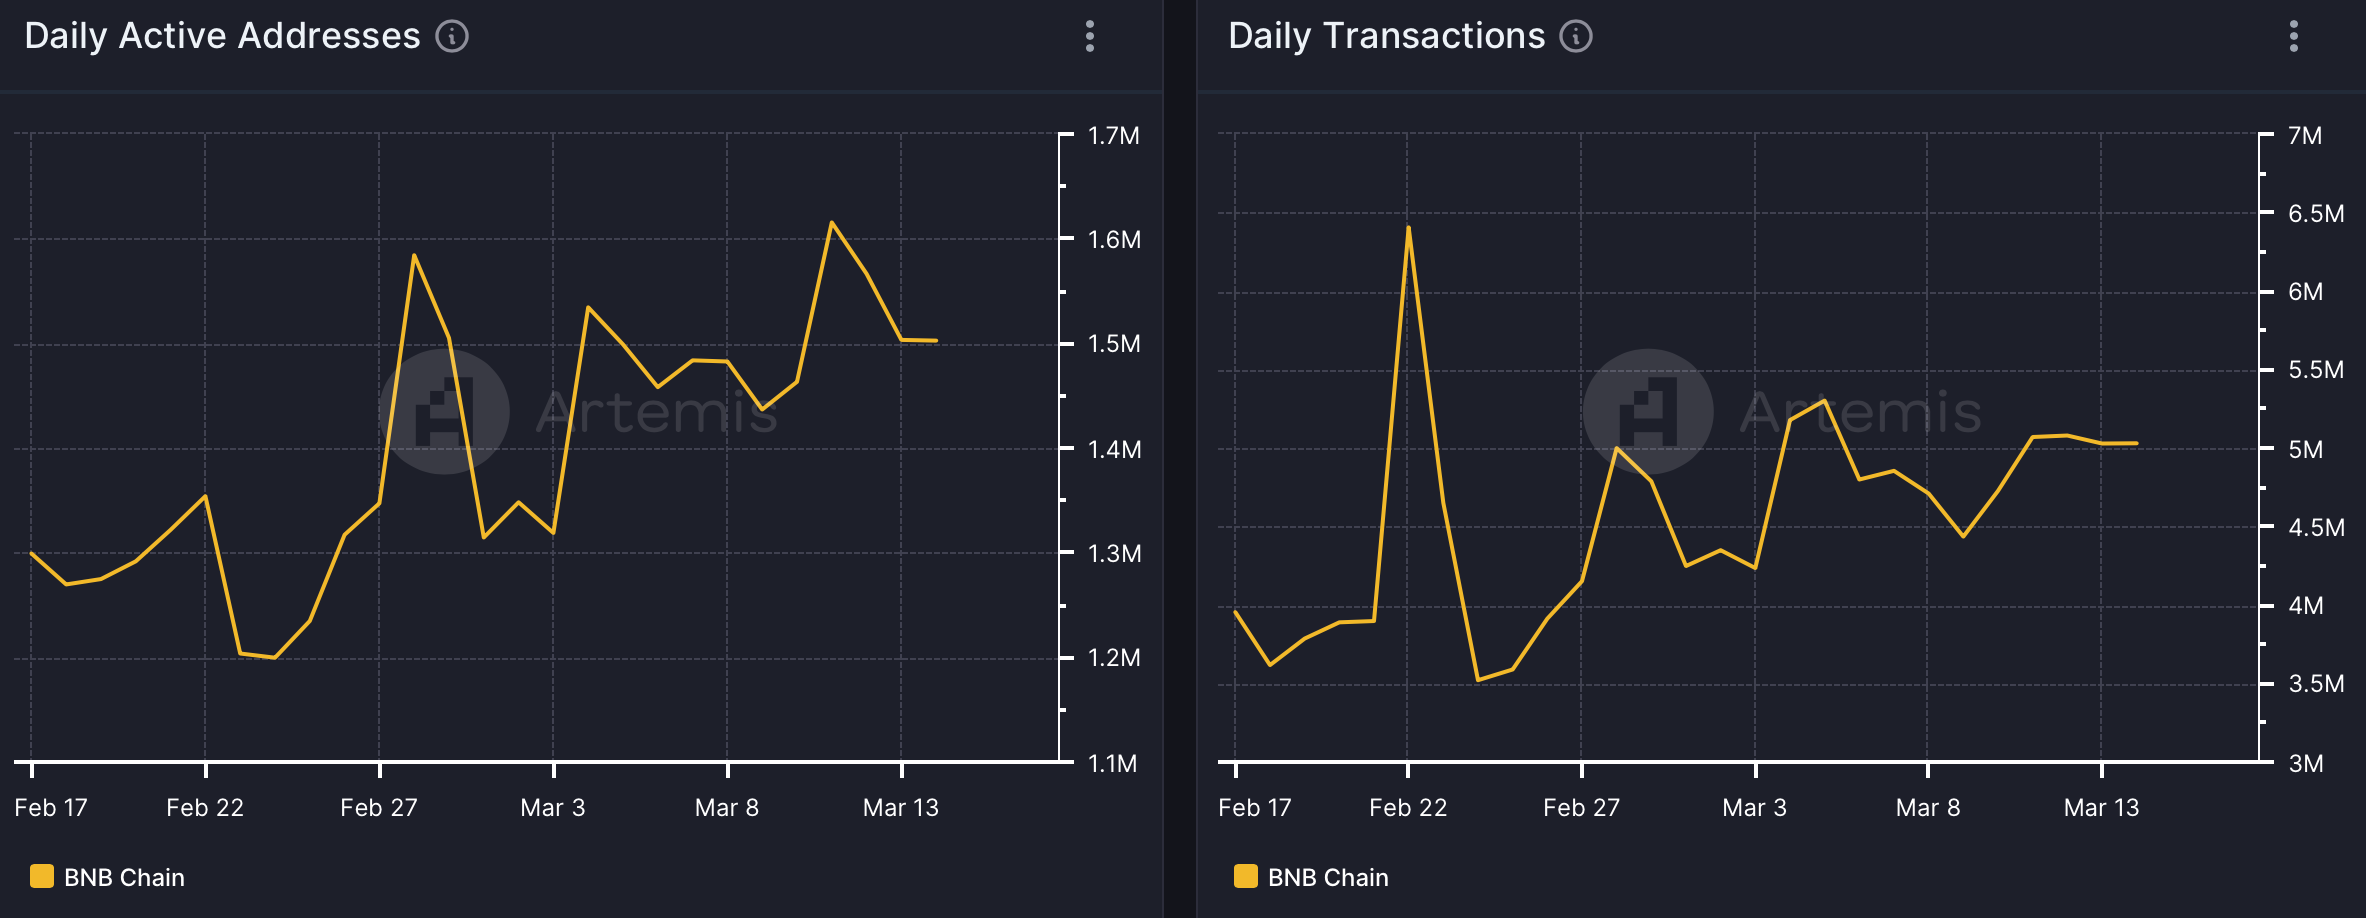 BNB's network activity is high